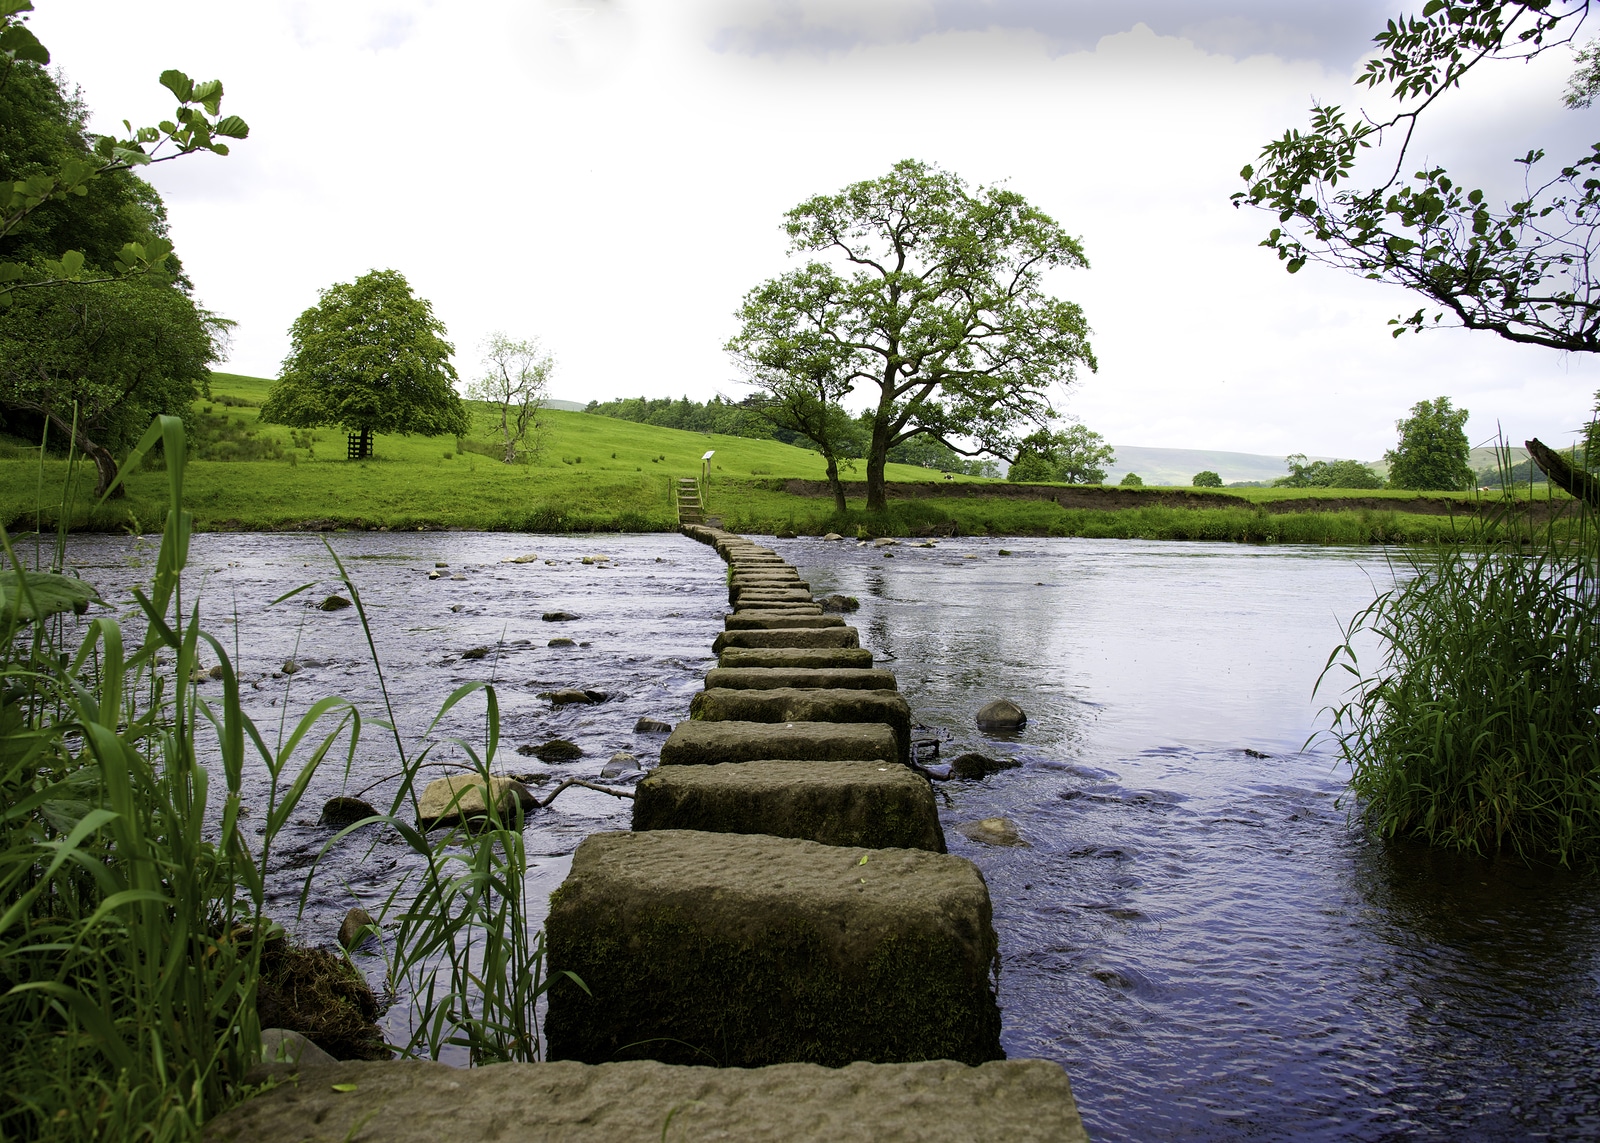 Stepping Stones